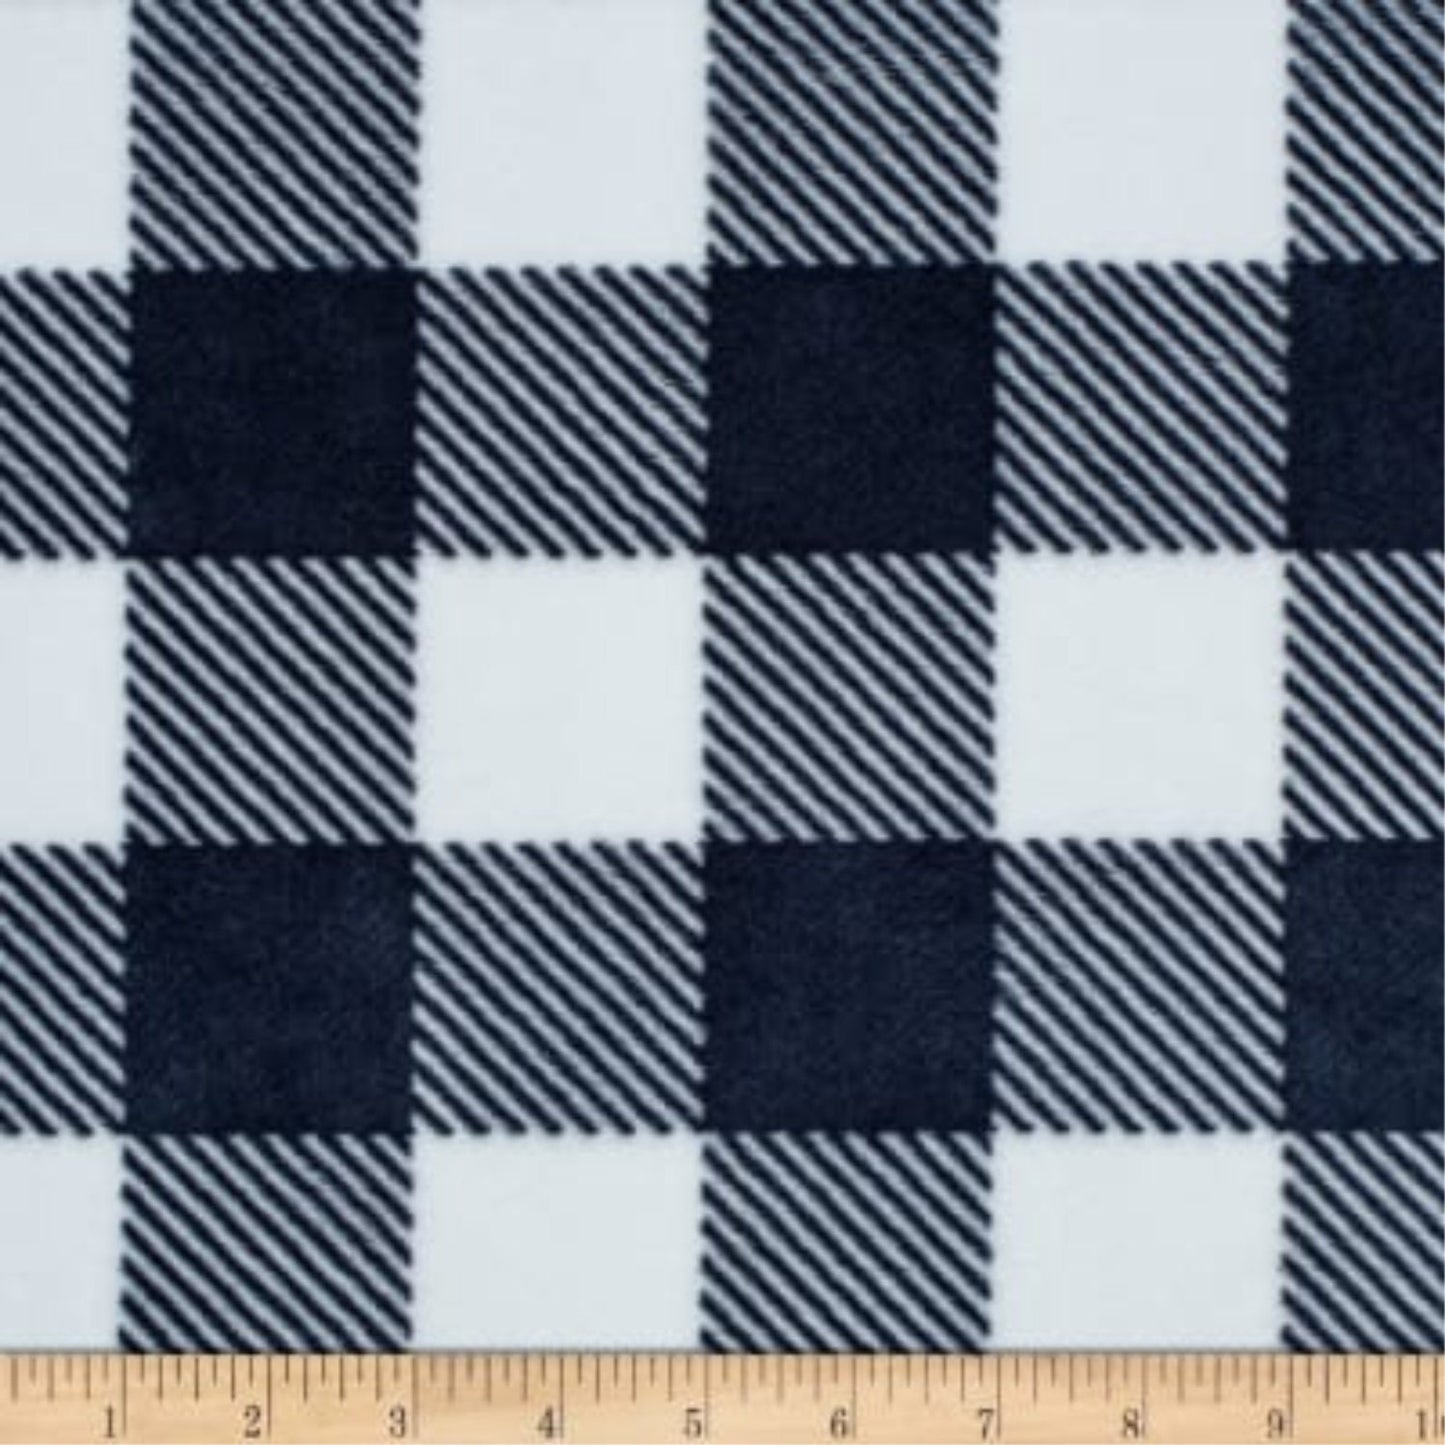 Buffalo Check Personalized Adult Minky Blanket, Plaid Navy and White, Minky Throw Blanket, Buffalo Check Throw Blanket